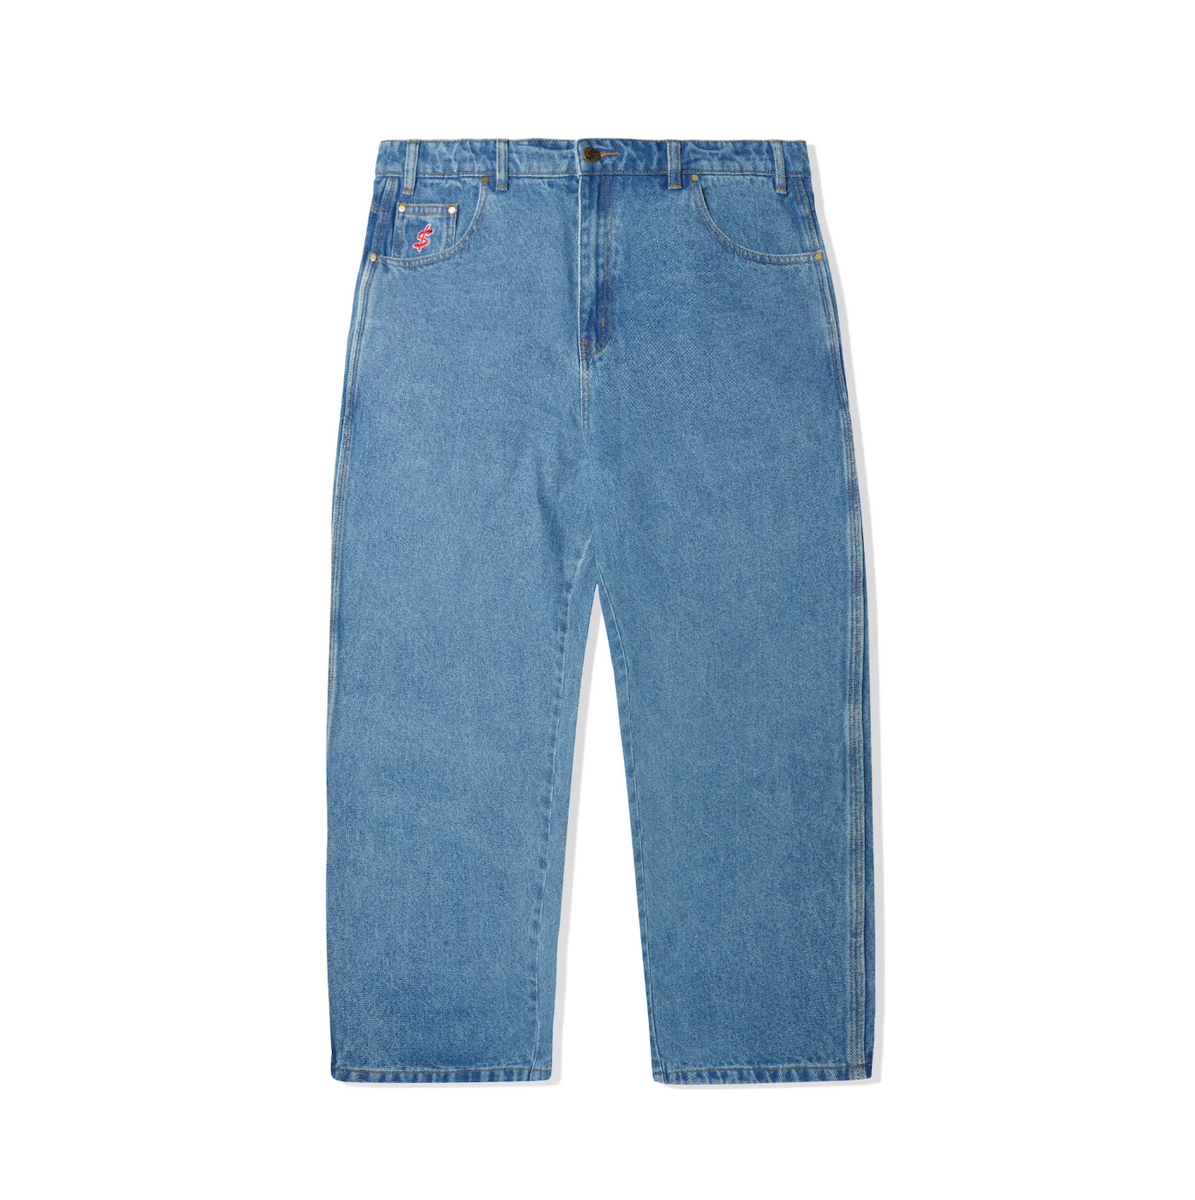 Cash Only - Wrecking Baggy Jeans (Washed Indigo) –